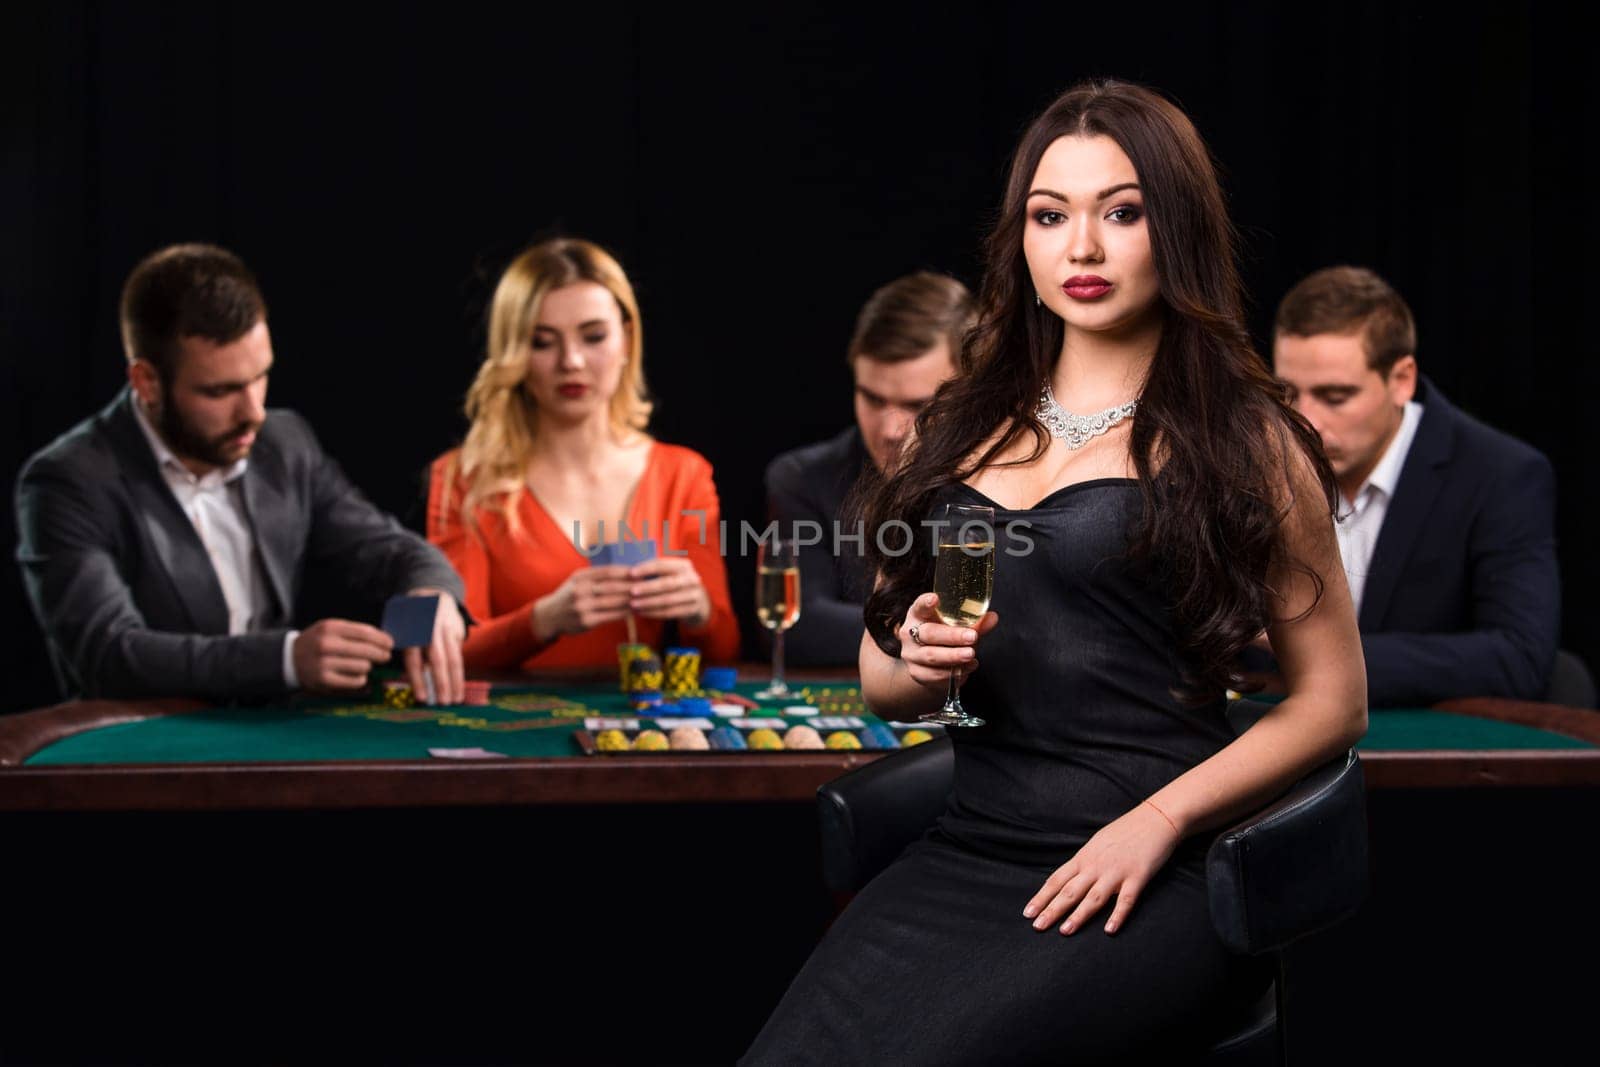 Young people playing poker at the table. Luxury women in dresses with a glass of champagne in hand sitting in the foreground. Casino